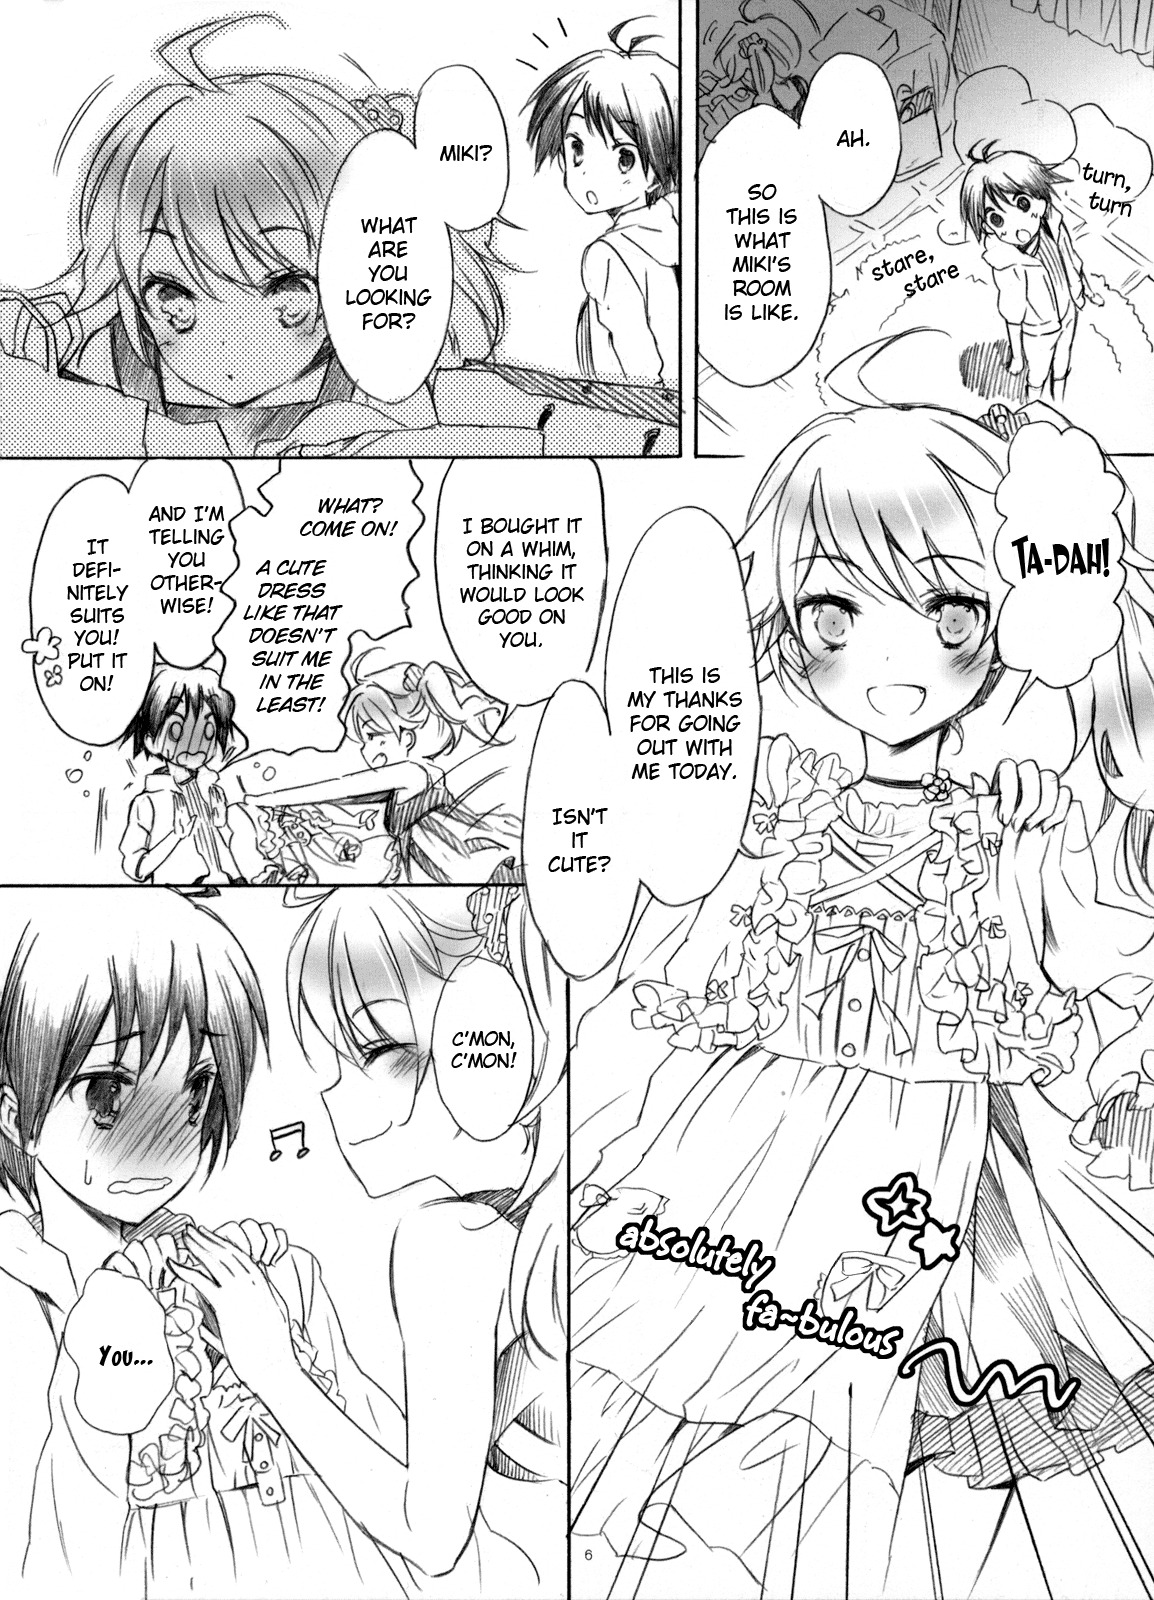 [ONIGIRIZ (CUTEG, Hypar)] IM@Sweets 4 I Want! (THE IDOLM@STER) [English] [yuriproject] [Incomplete] page 5 full